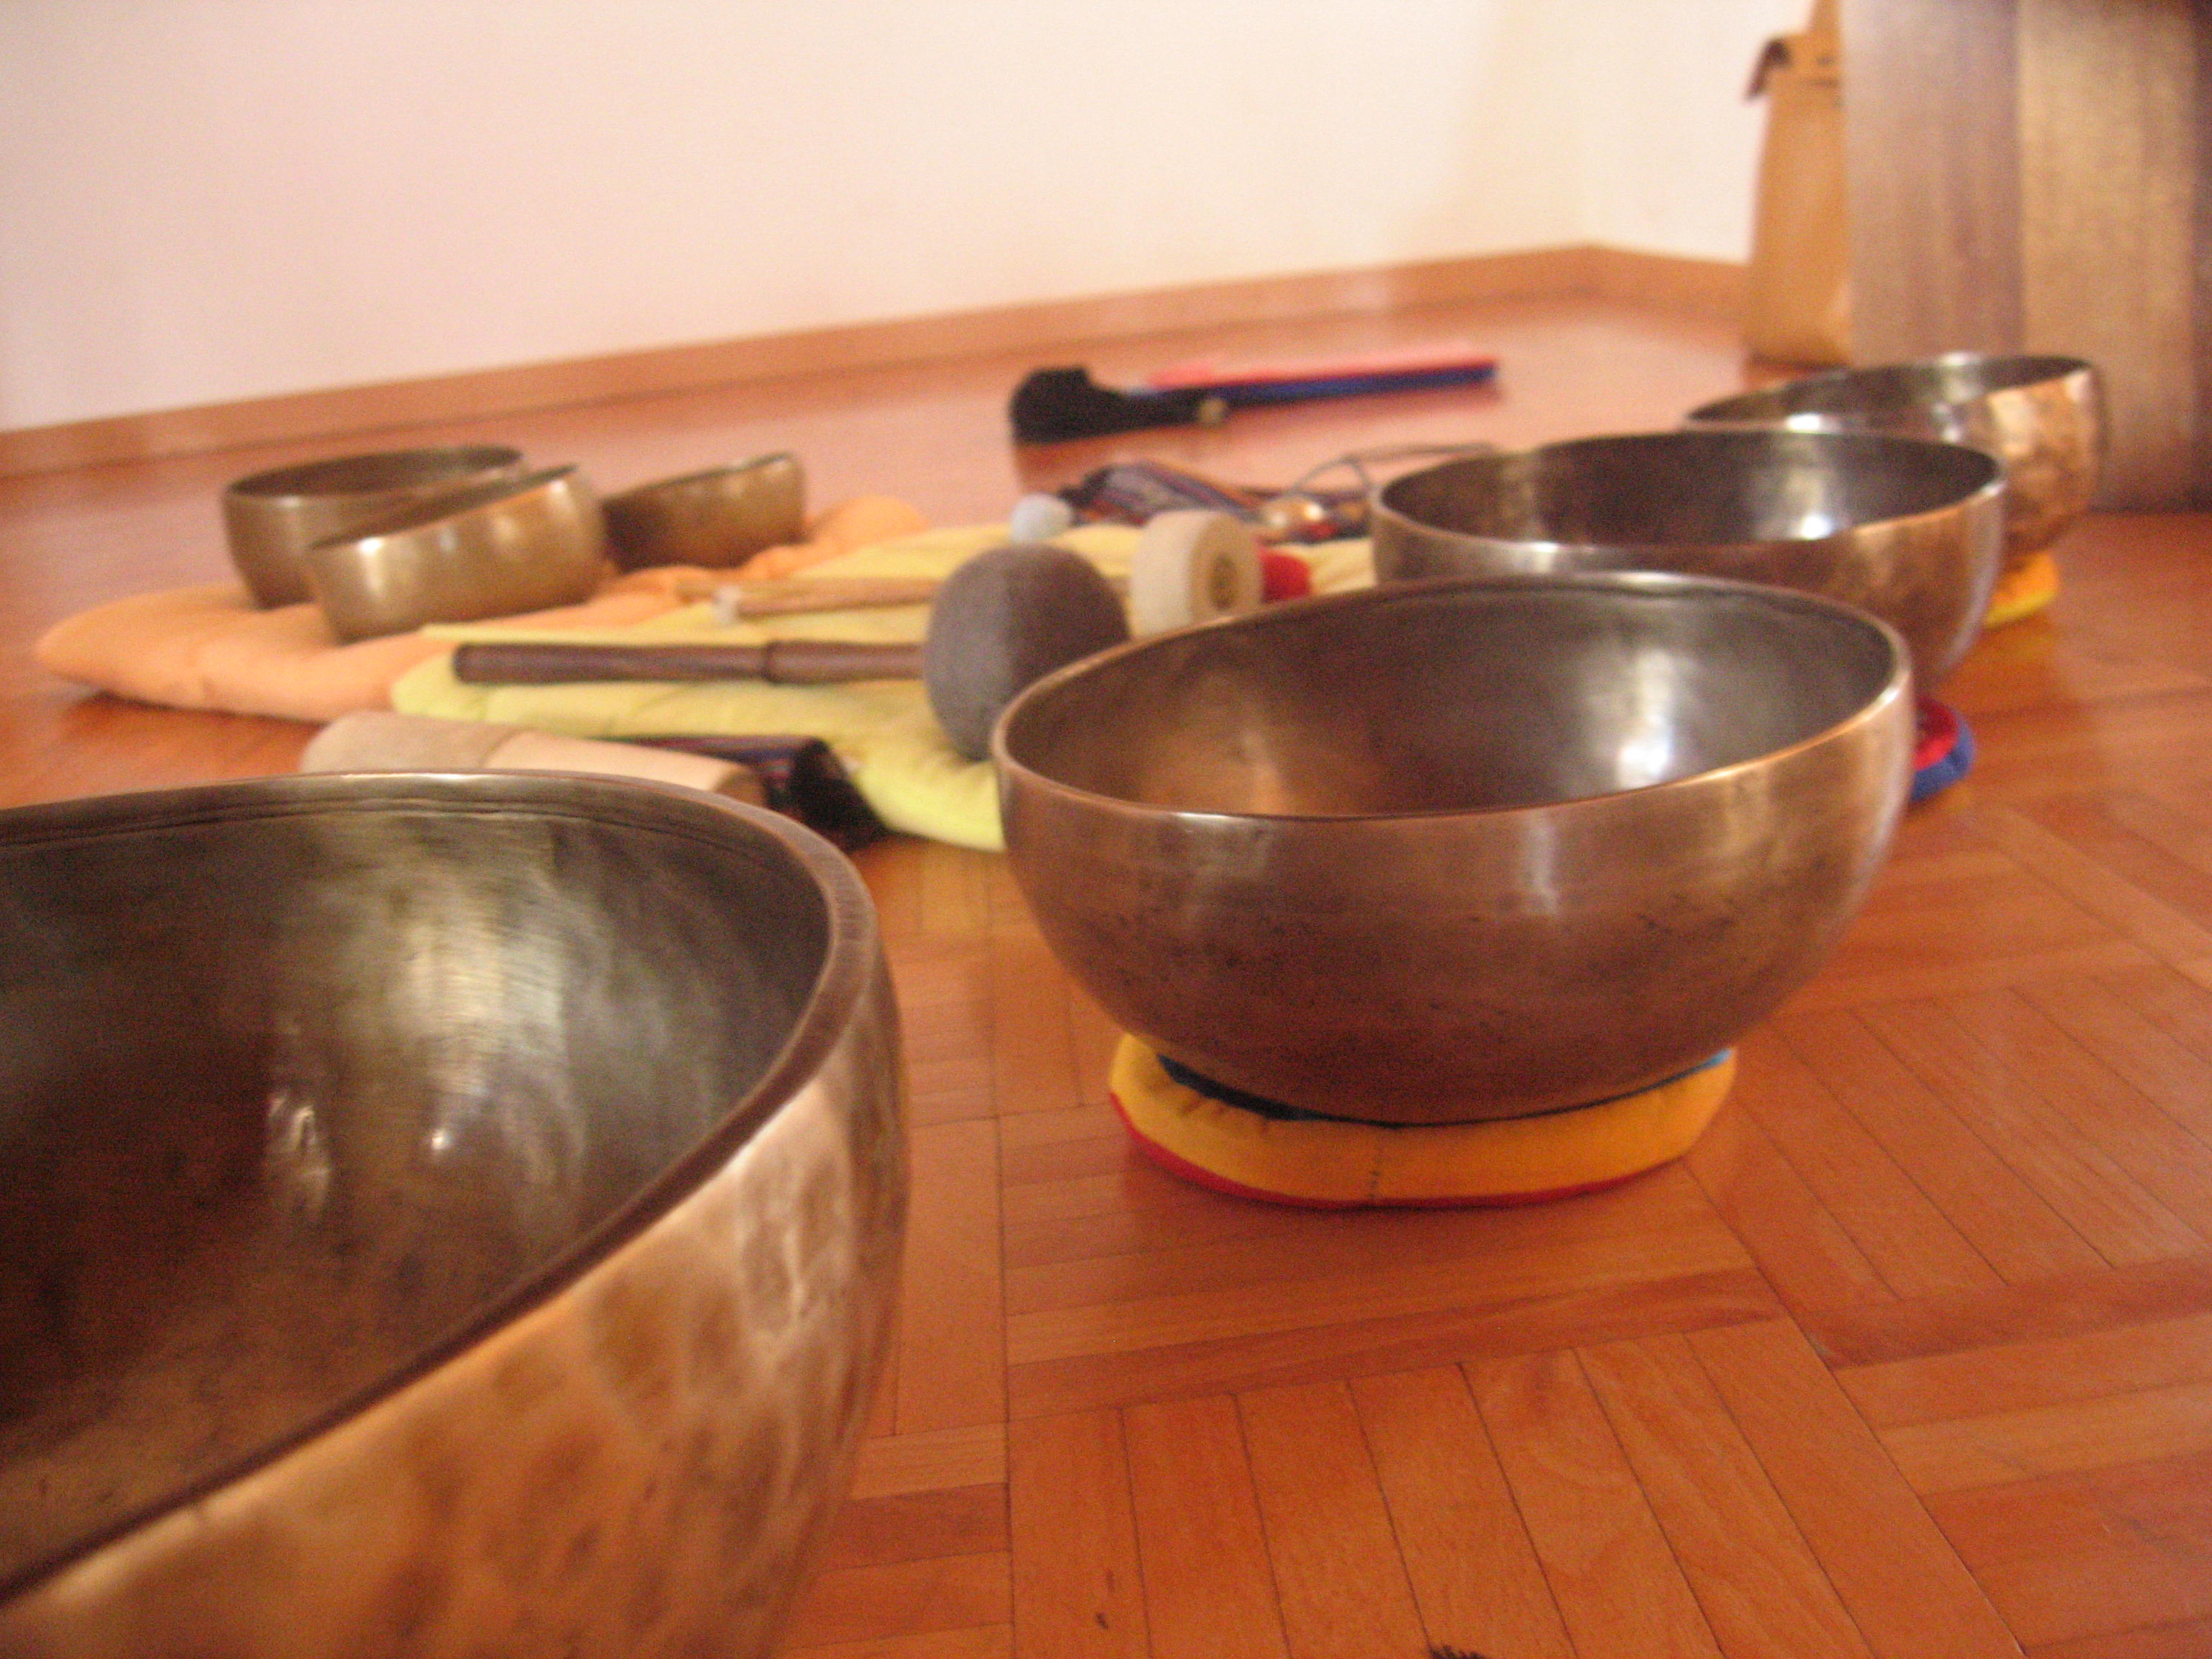 Tibetan Singing Bowl Therapeutic Sound Massages Given by Michael Ormiston